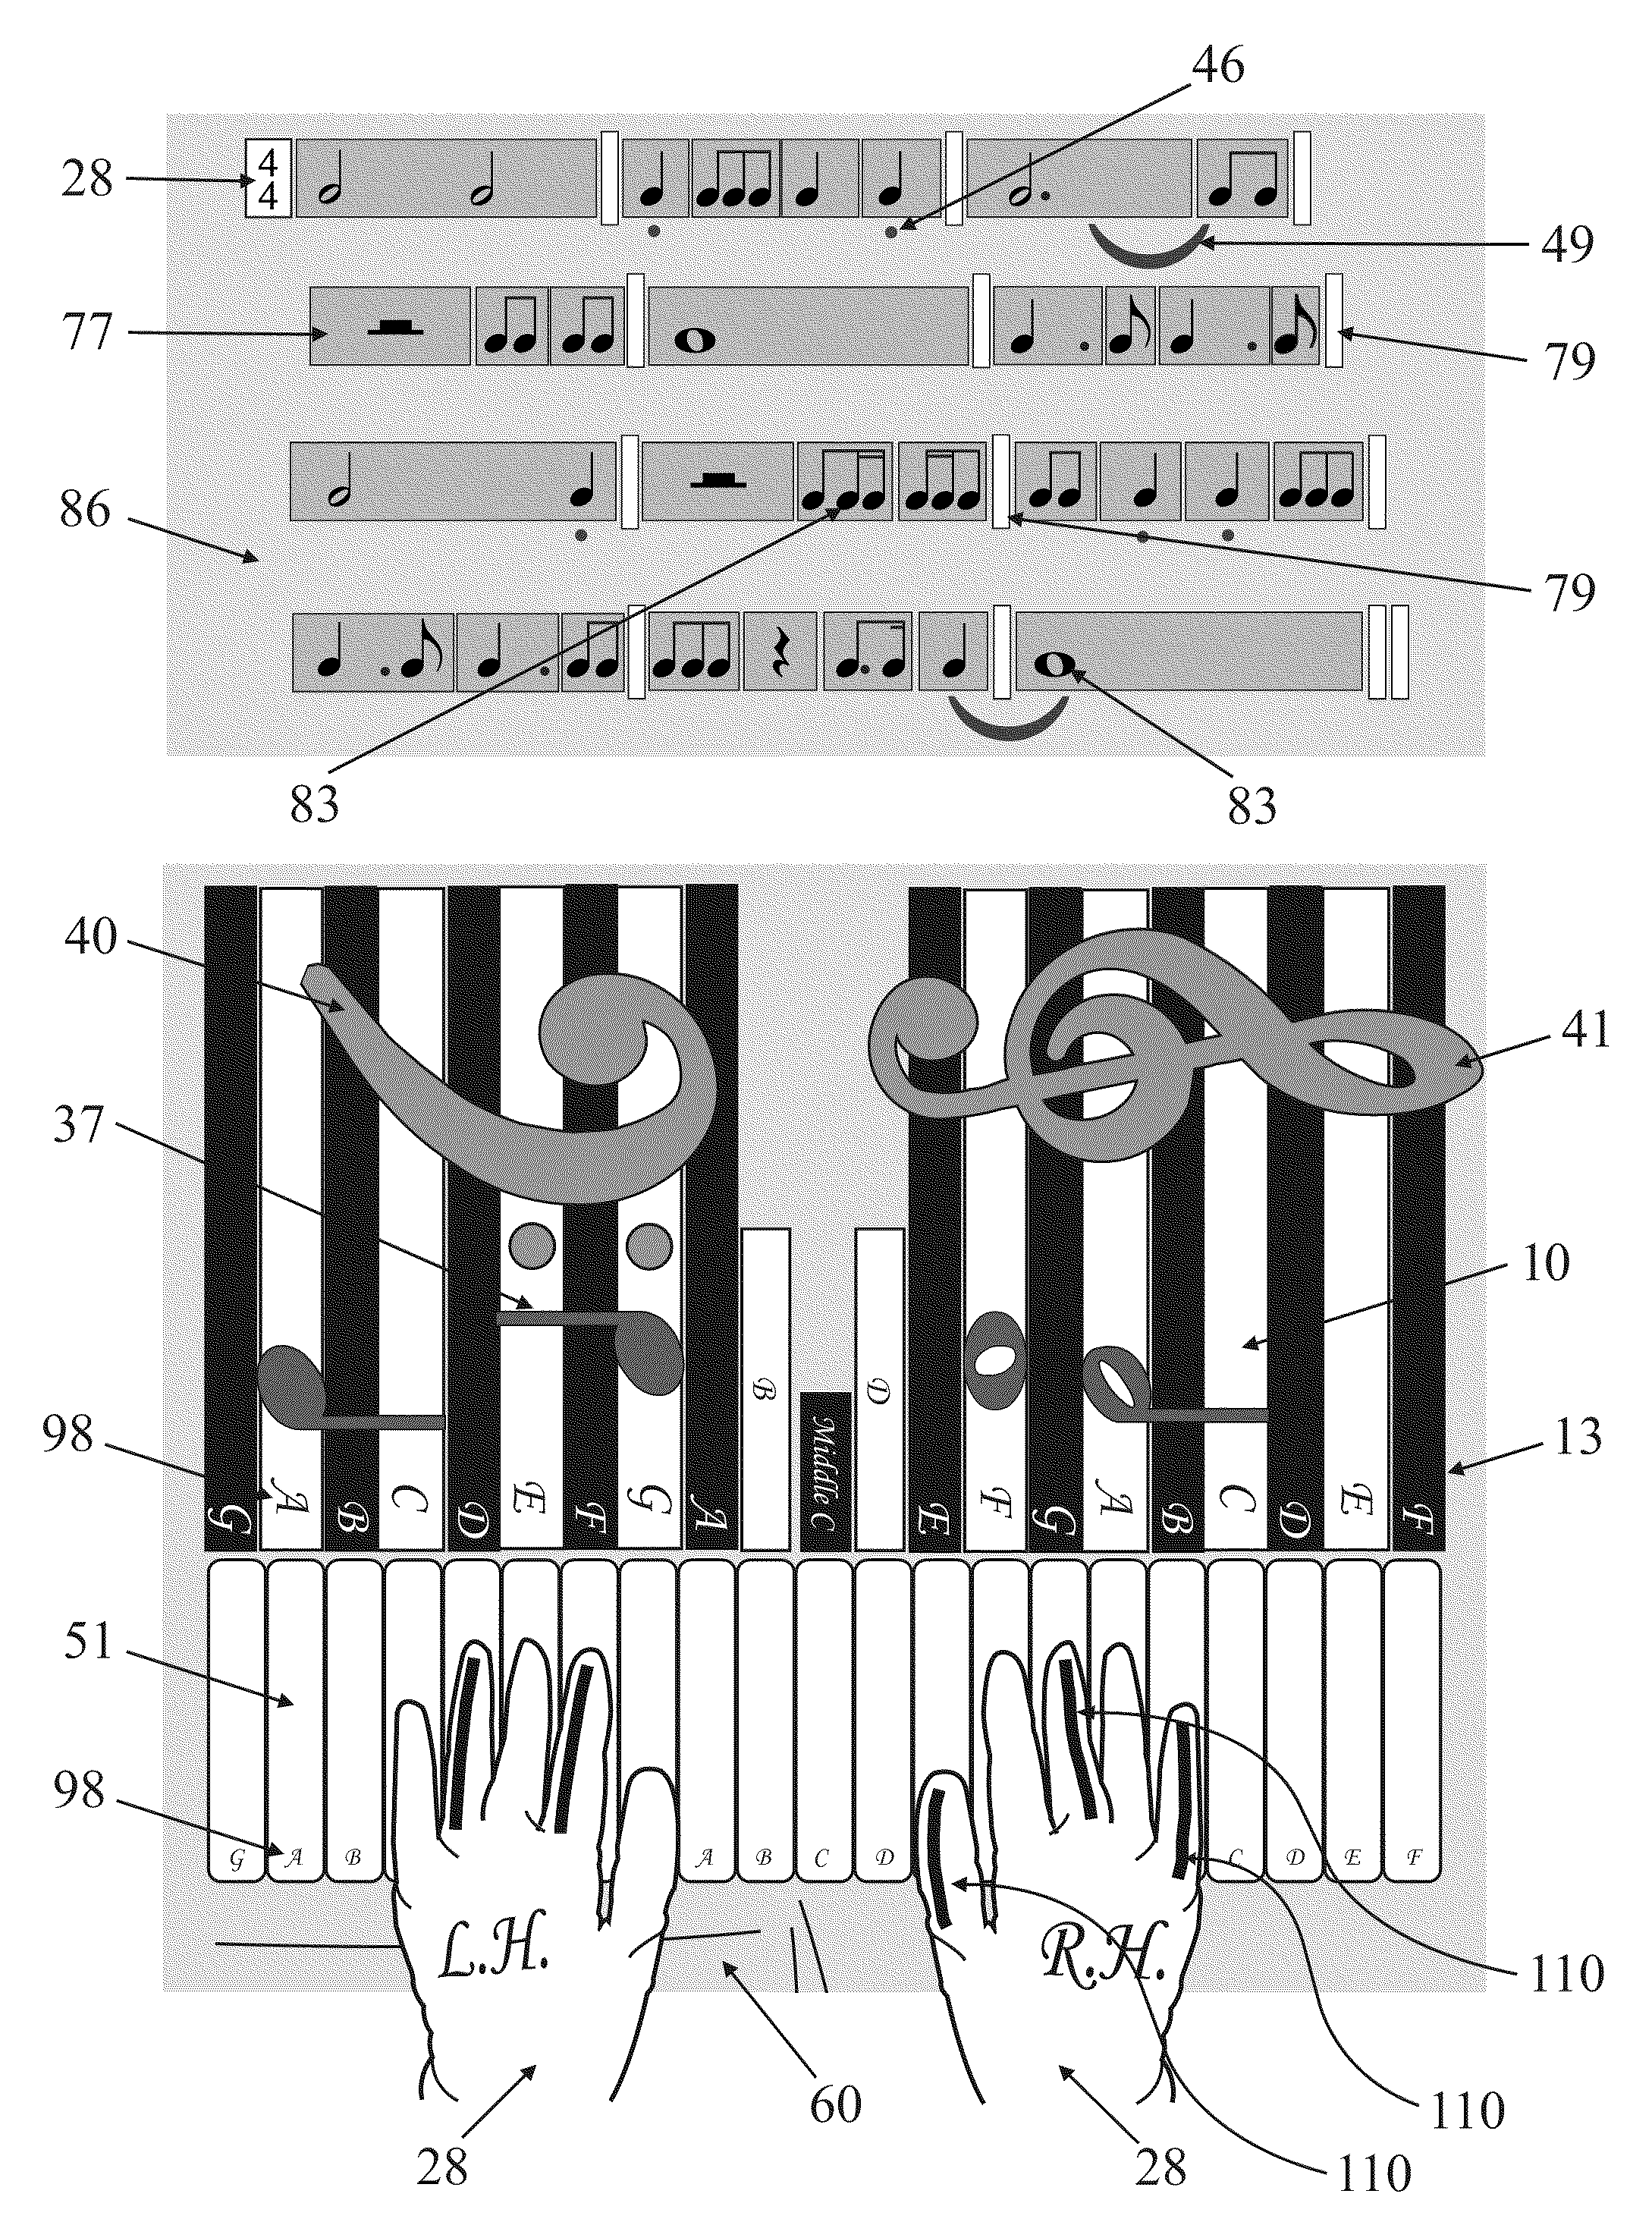 Kit and method for learning to play an instrument